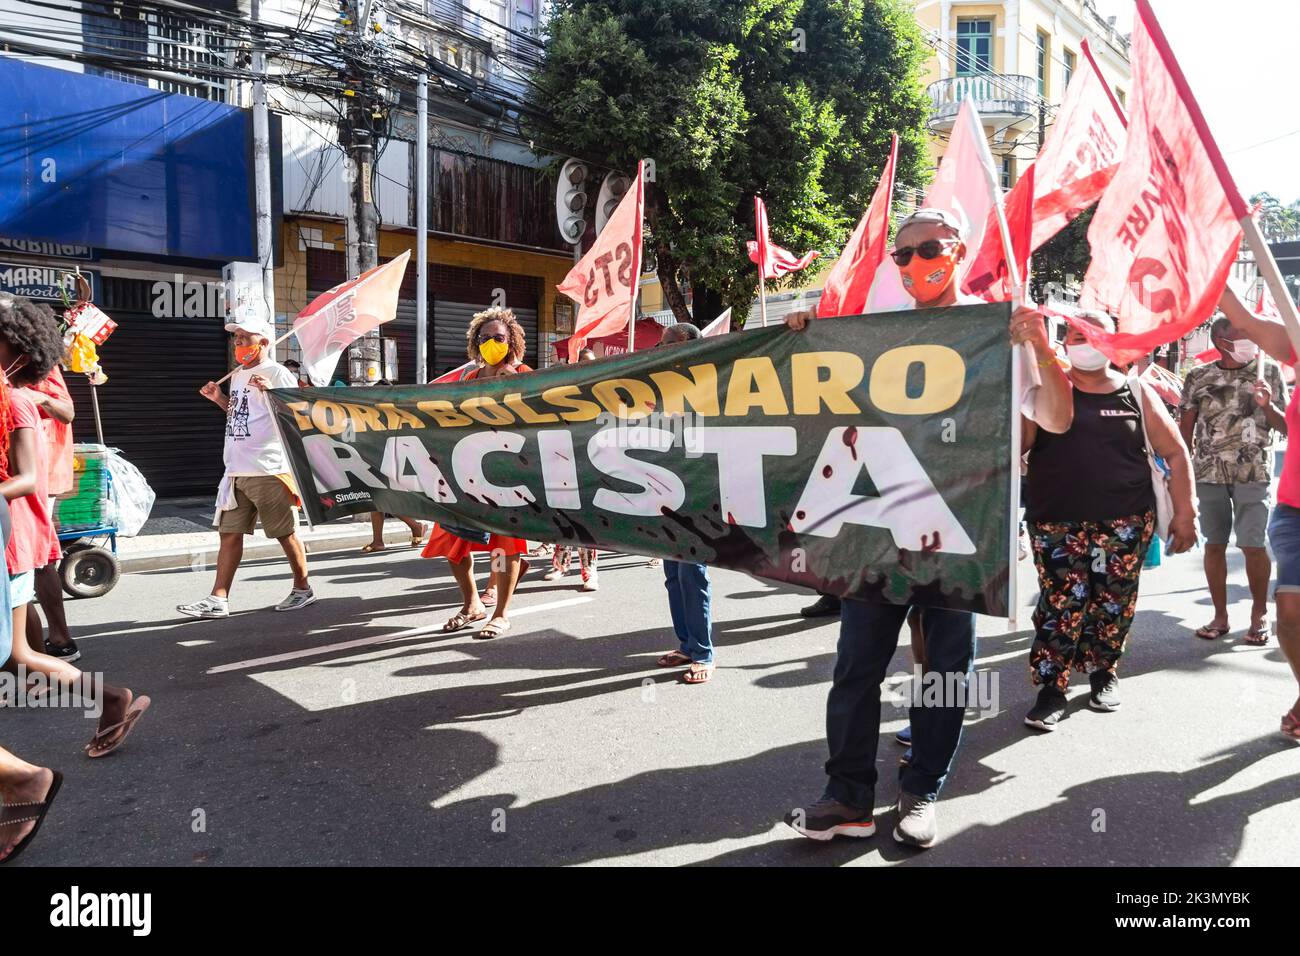 Salvador, Bahia, Brazil - November 20, 2021: Brazilians protest with banners and posters with words against the government of President Jair Bolsonaro Stock Photo